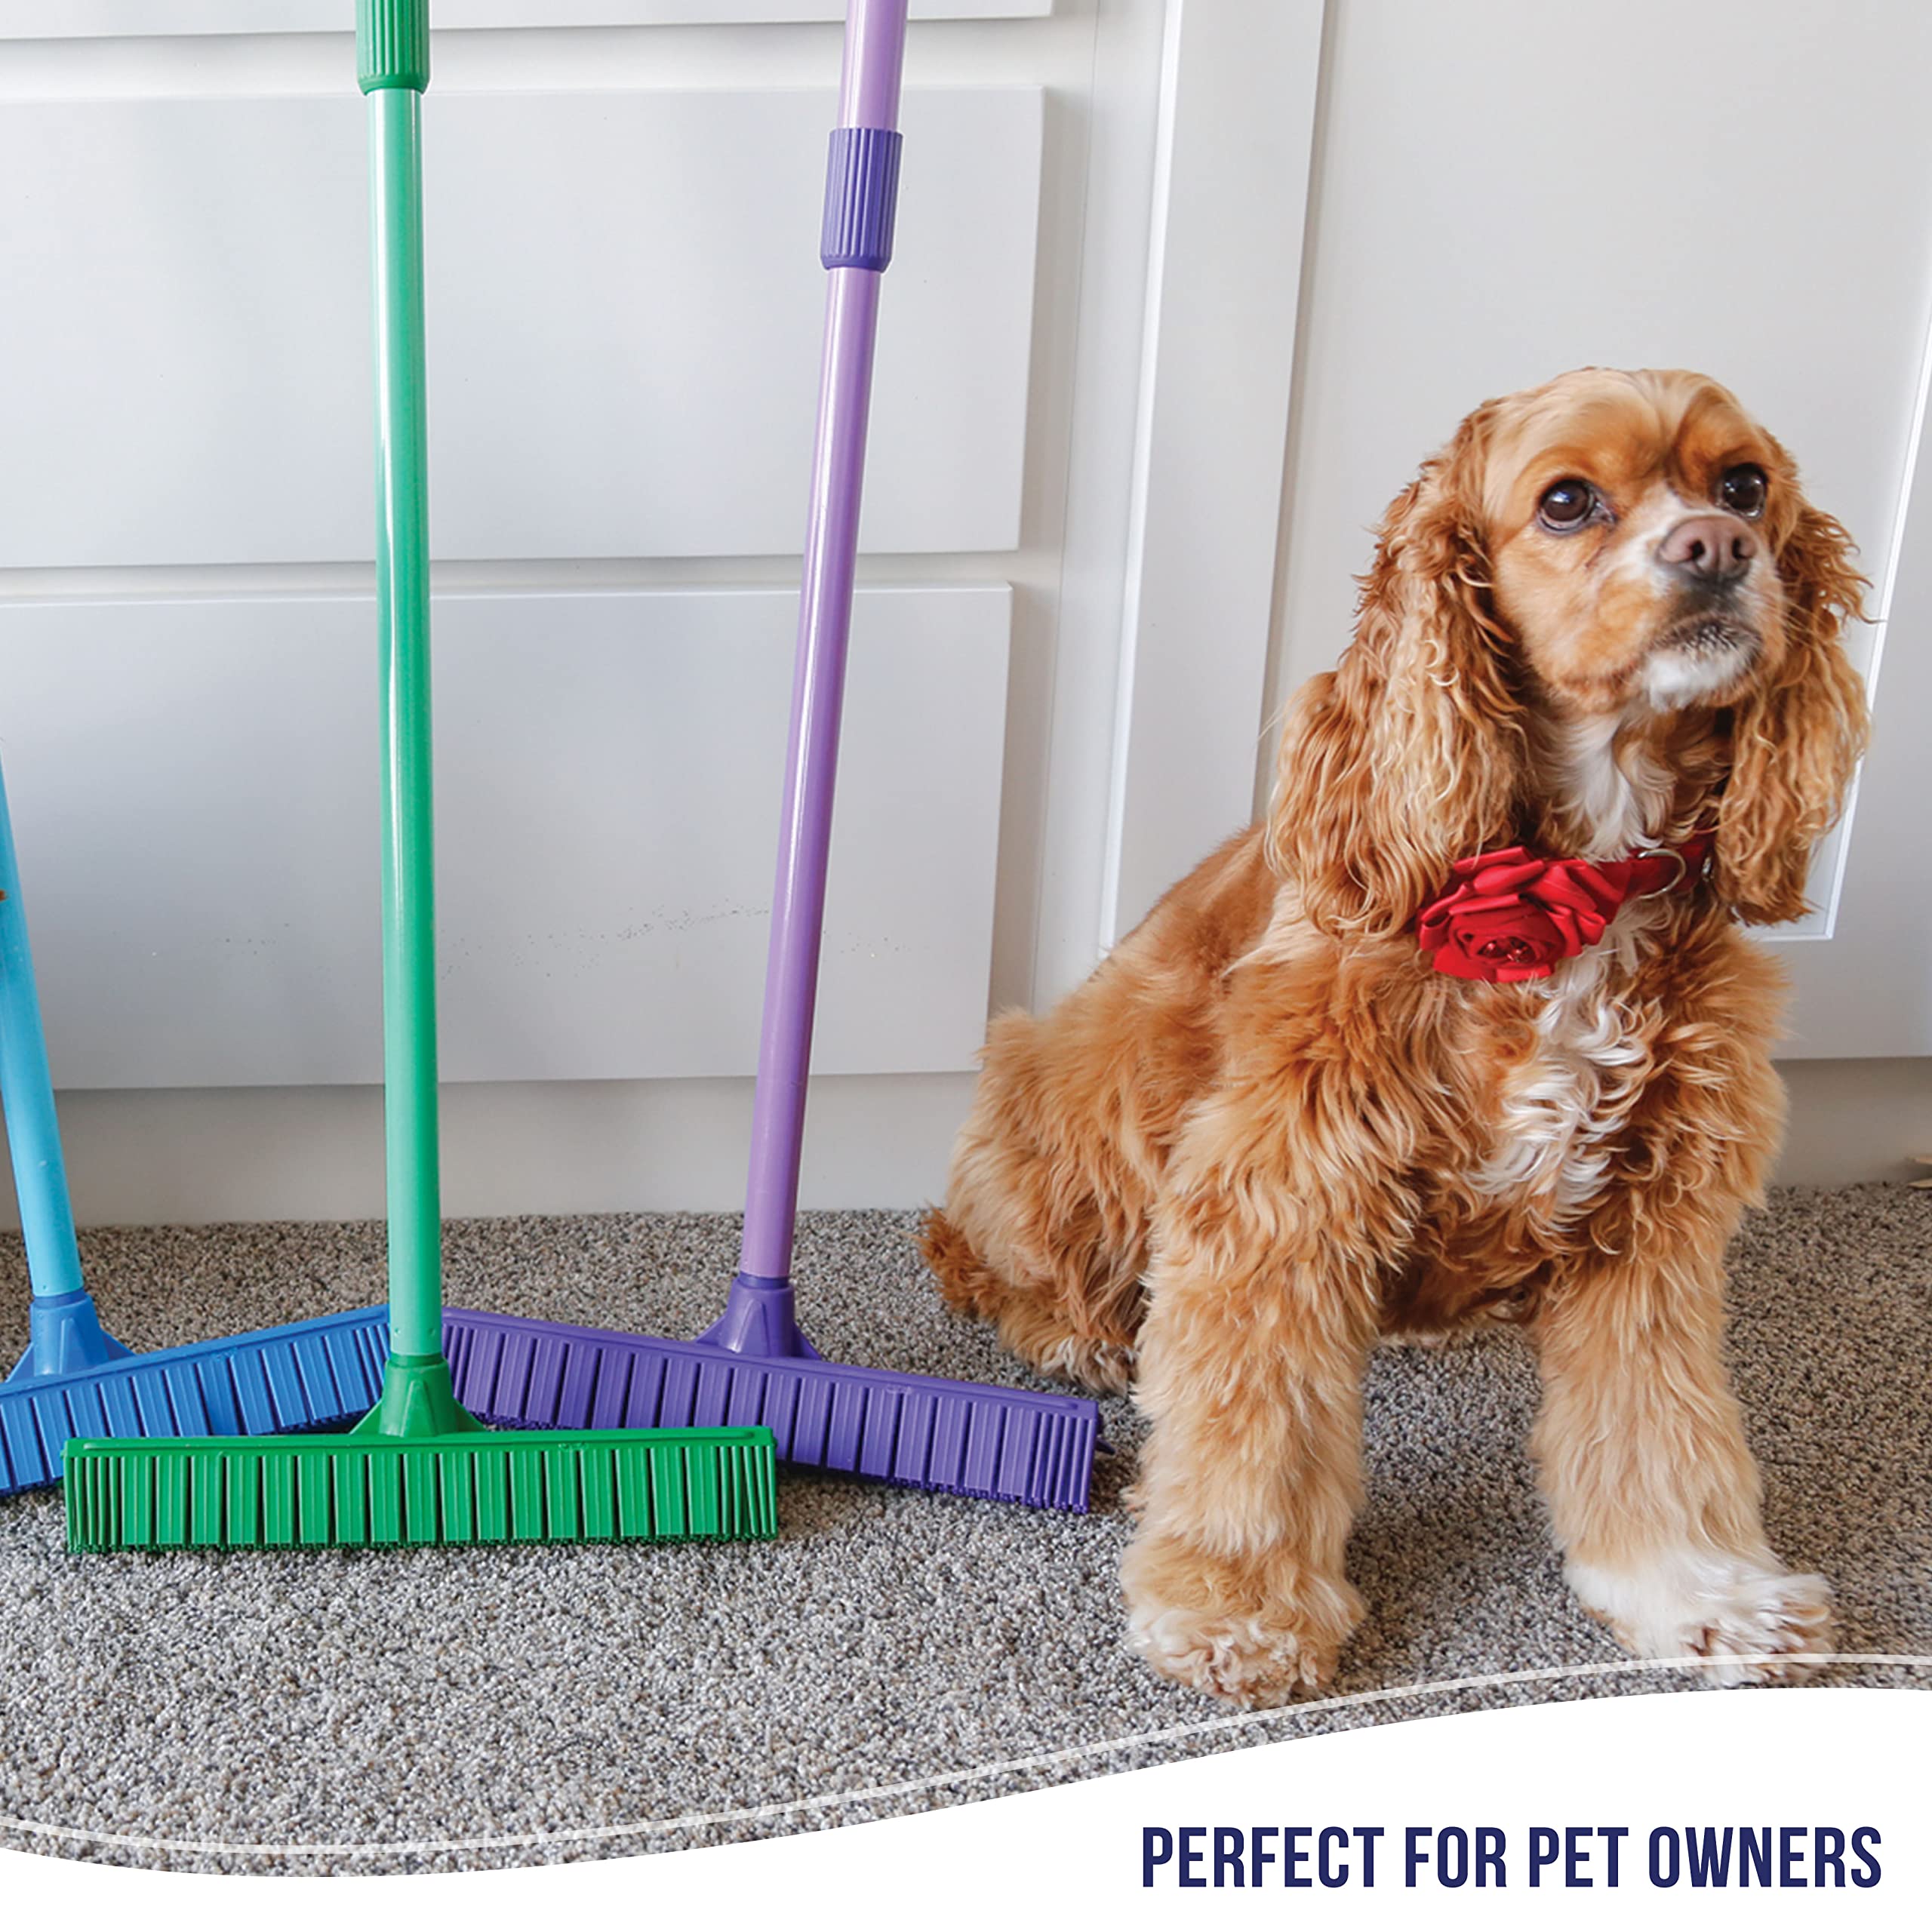 Don Aslett's Rubber Broom (12") and Hand Brush (10") Set | 59-inch Steel Pole | Multipurpose Synthetic Rubber Bristles Cleans Pet Cat or Dog Hair, Liquid Spills on Concrete & Hardwood Surface (Purple)